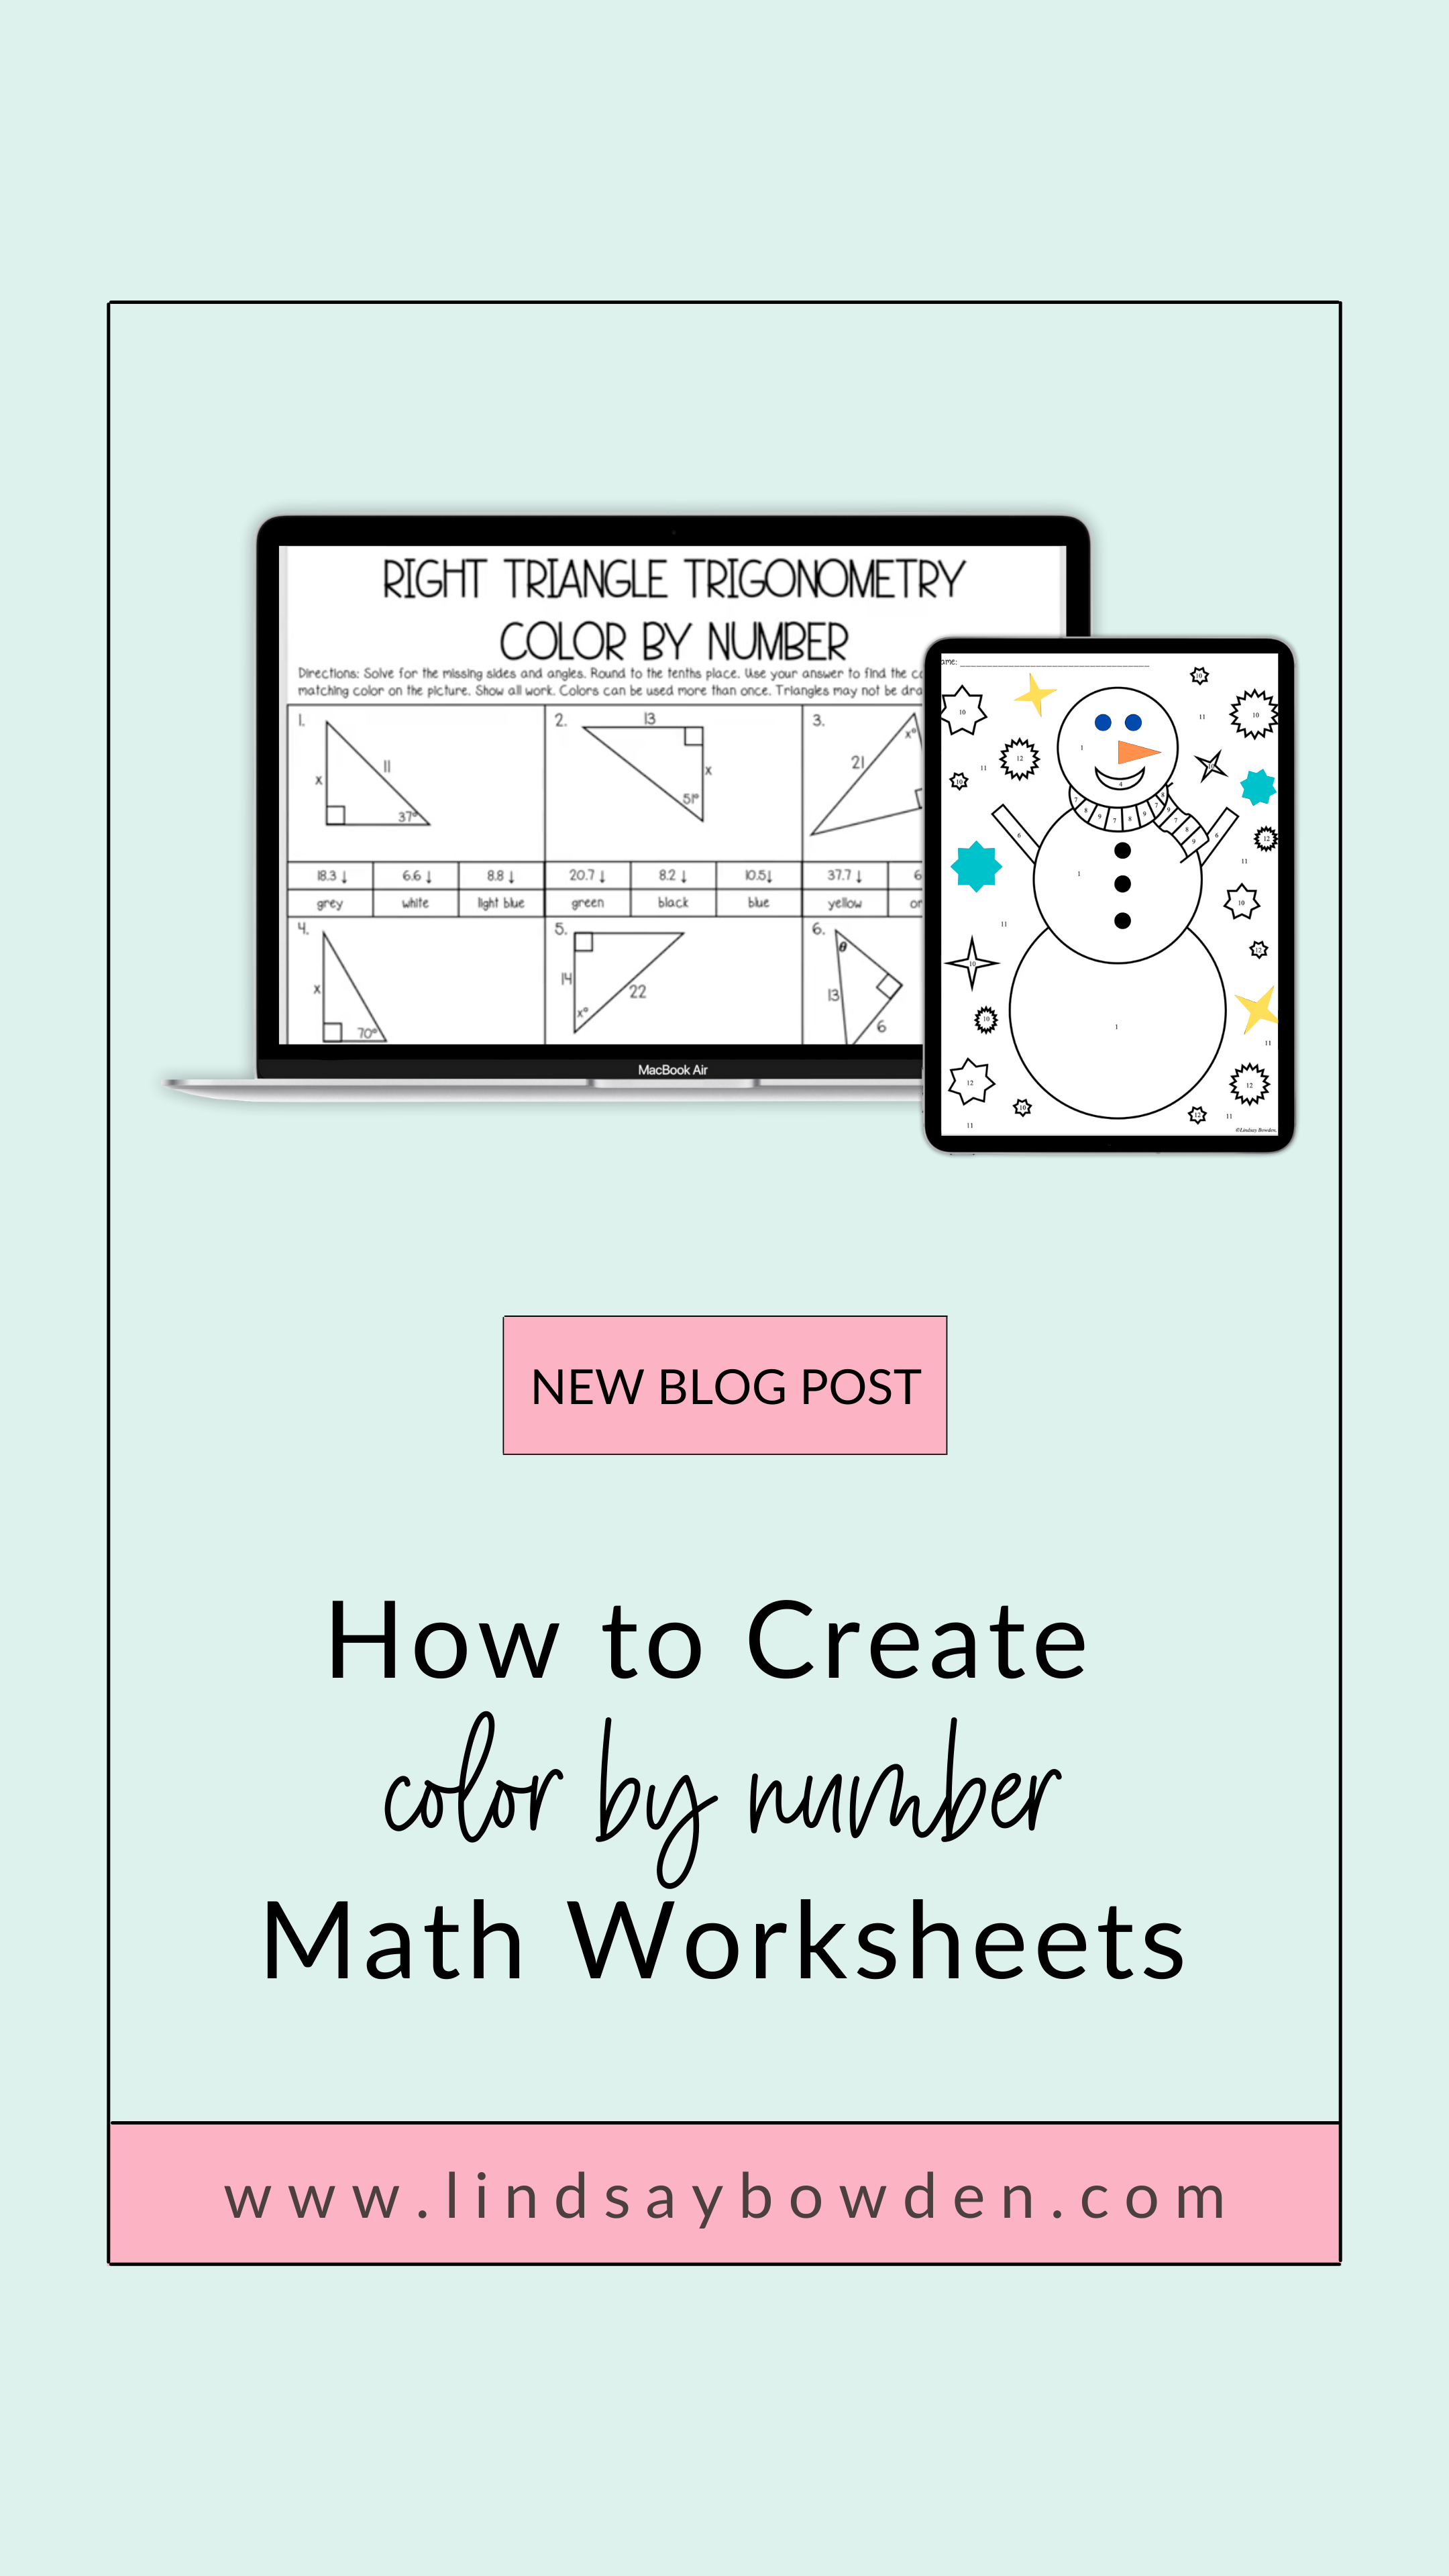 how-to-make-color-by-number-math-worksheets-lindsay-bowden